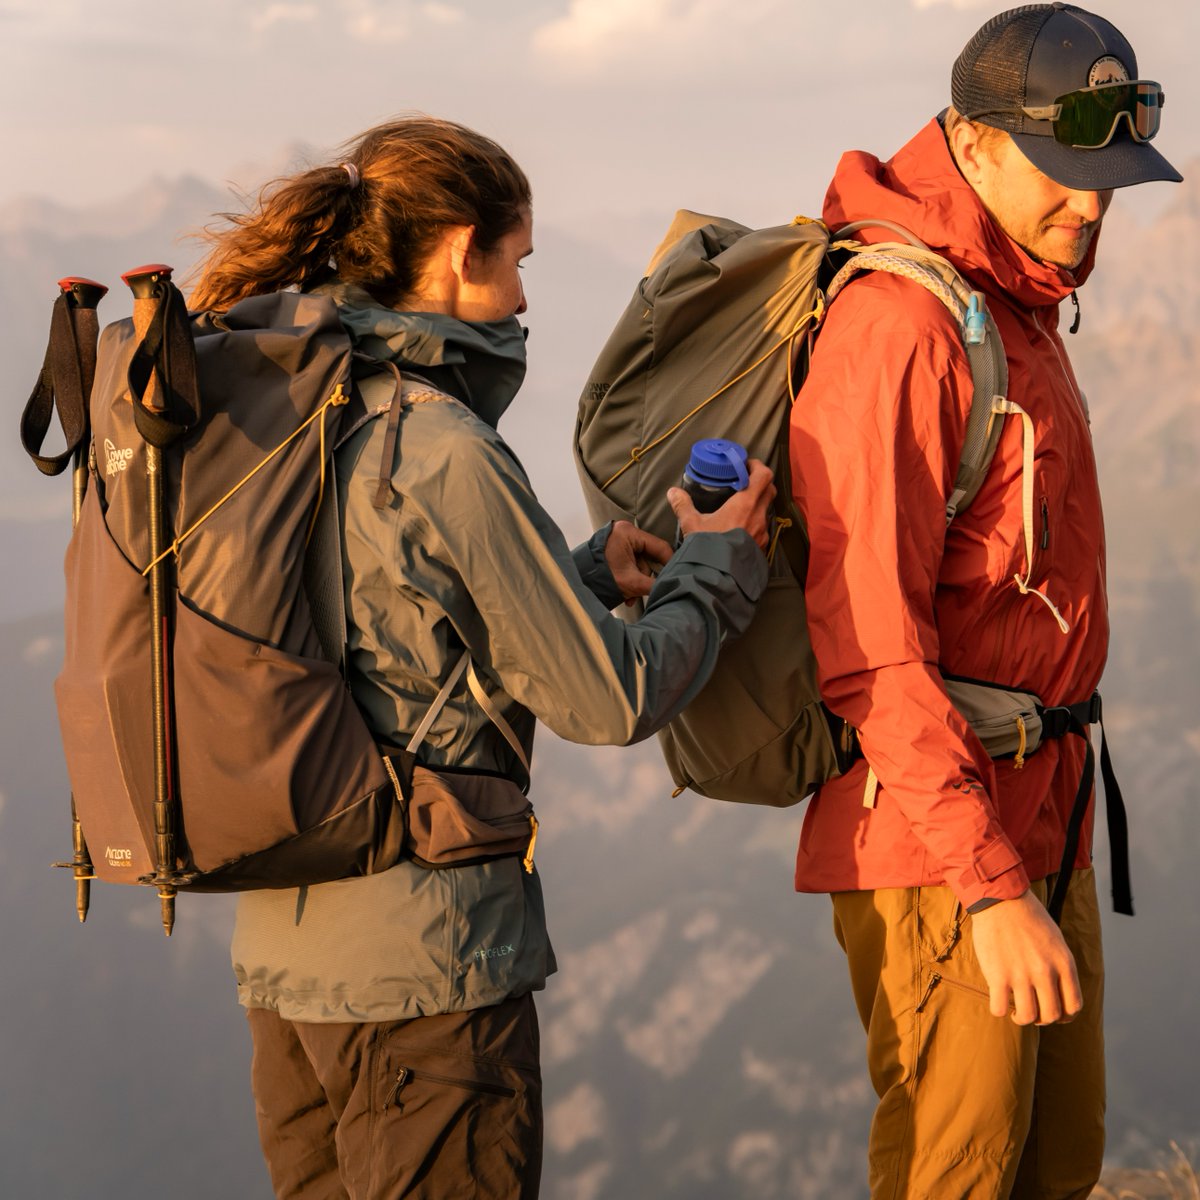 New adventure packs just landed. Pioneering stability, comfort, and freedom of movement, our new packs are built to help you push your boundaries, wherever your next adventure takes you. 🛒 // bit.ly/3vpsiu4 #WhereNext #LoweAlpine